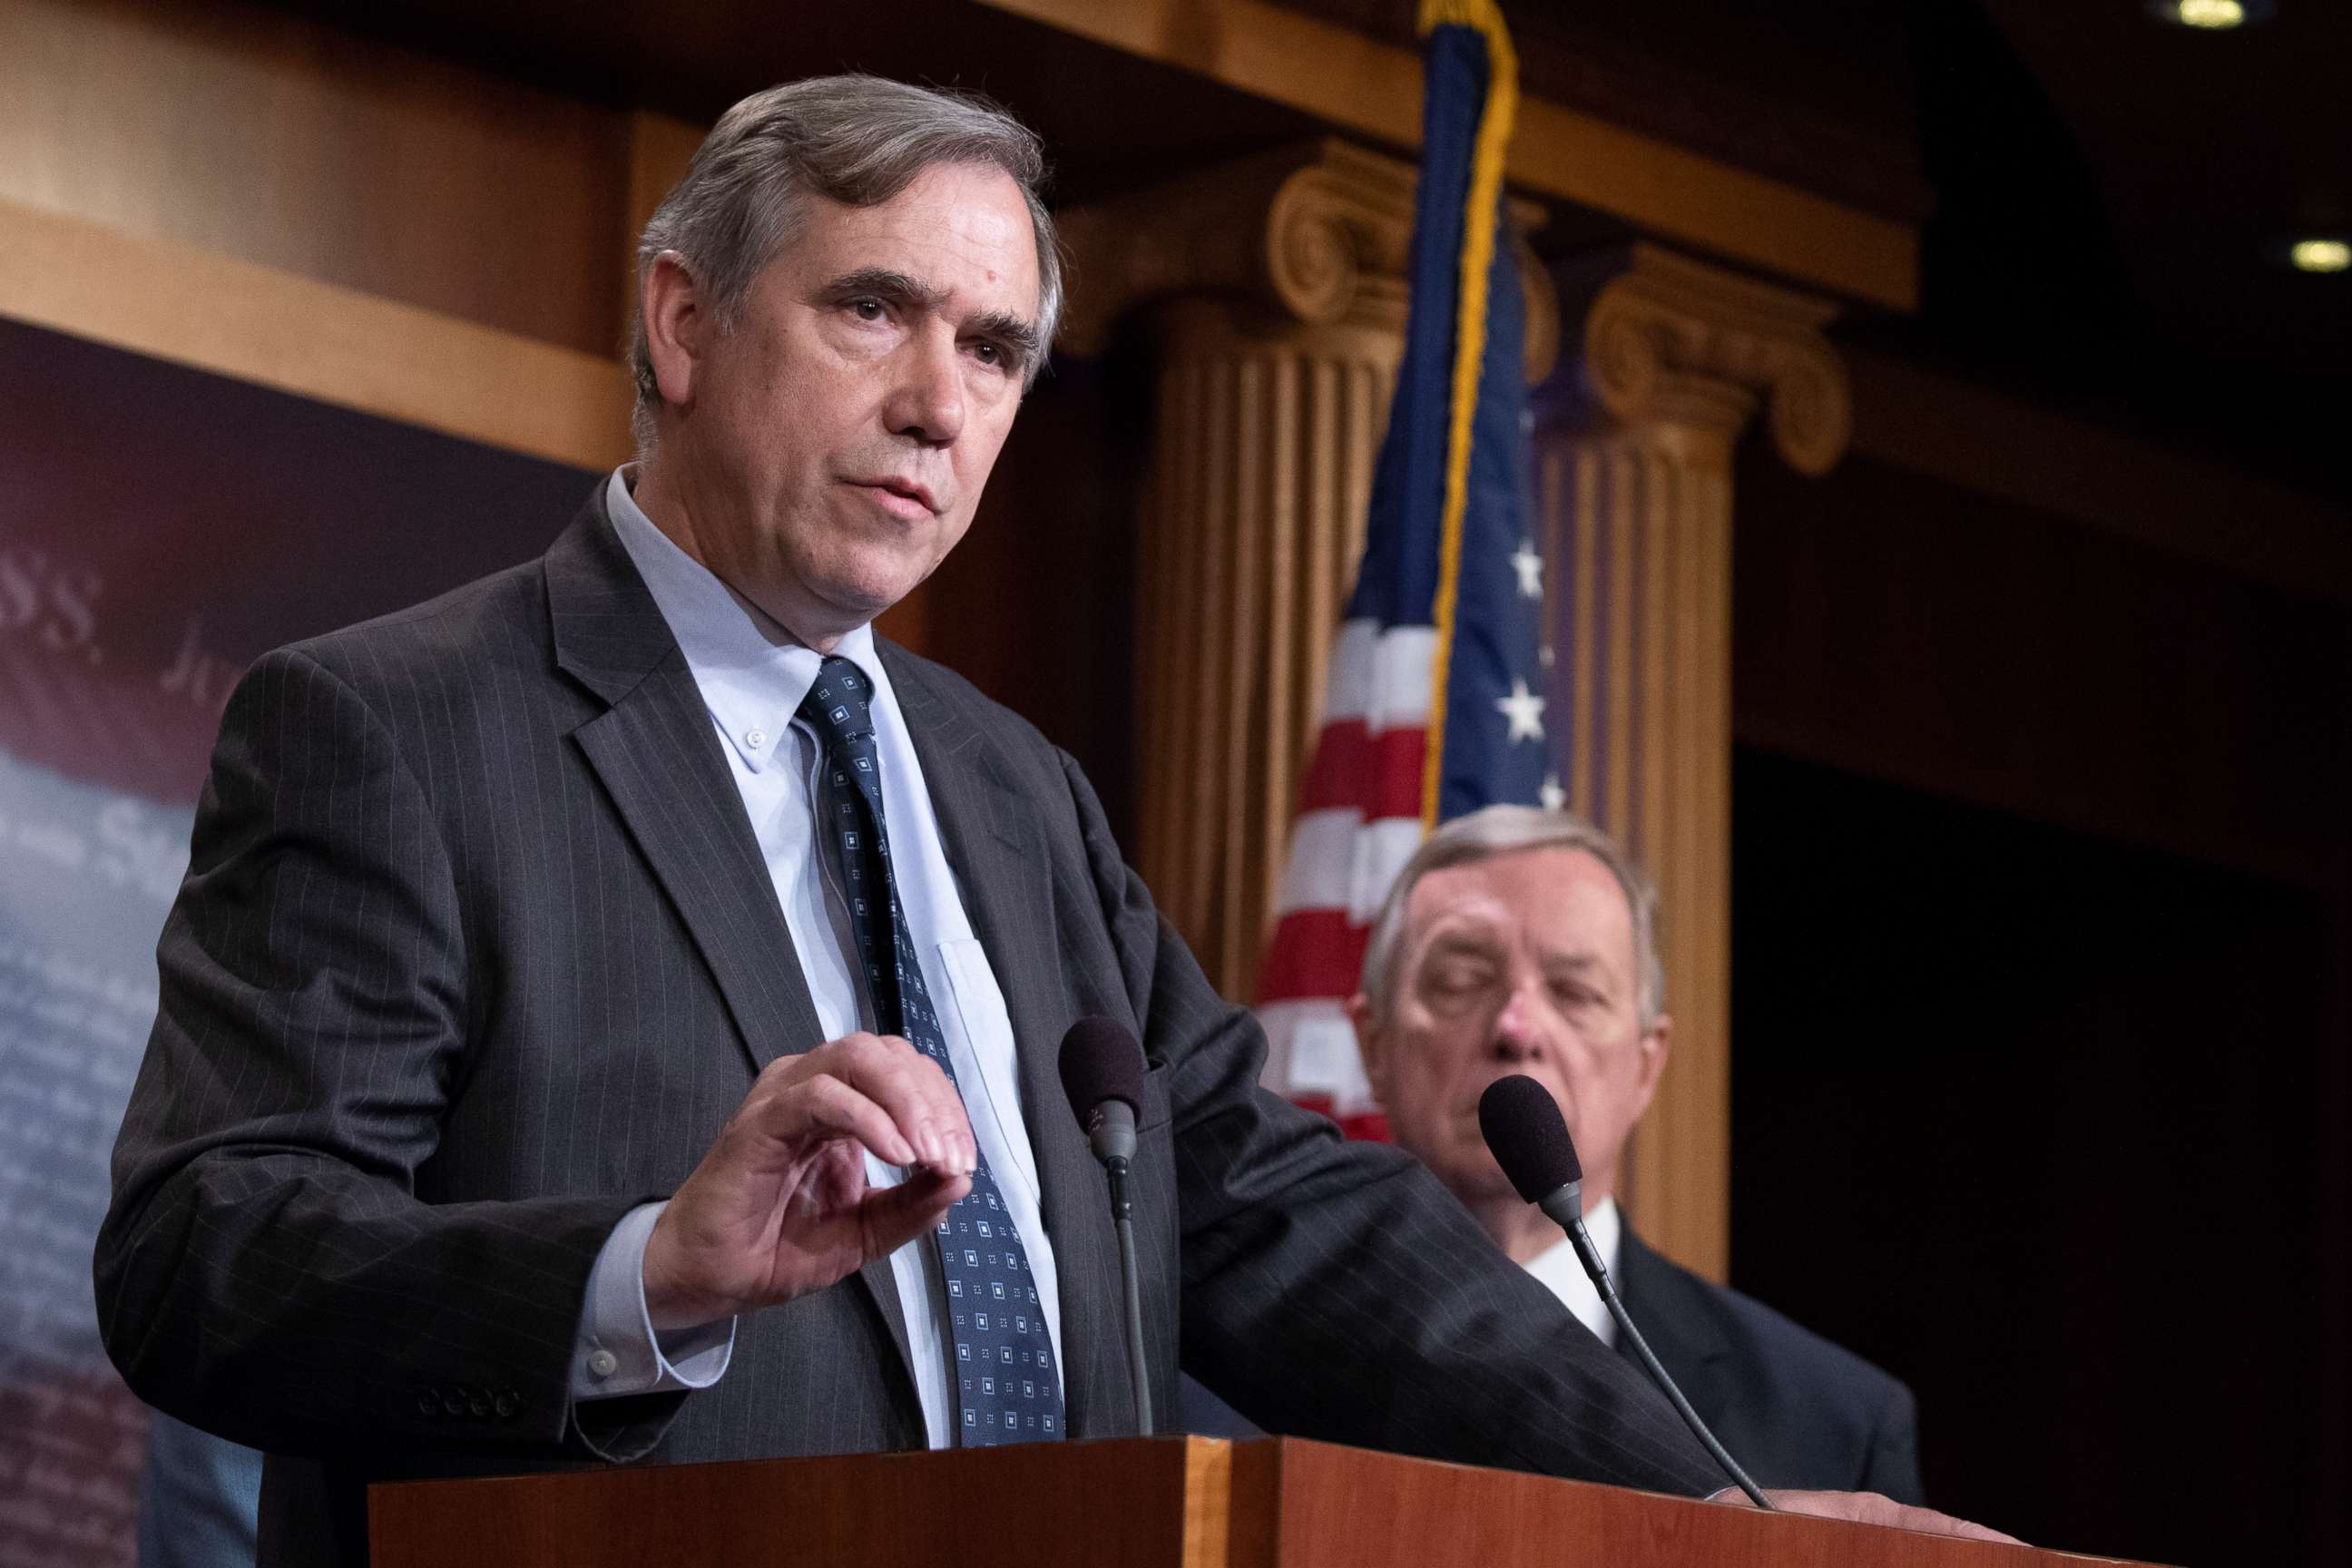 PHOTO: Senator Jeff Merkley, Democrat of Oregon, speaks during a press conference held by Senate Democrats demanding an end to parent child separations on the Southern United States Border by the Federal Government on Capitol Hill in Washington.